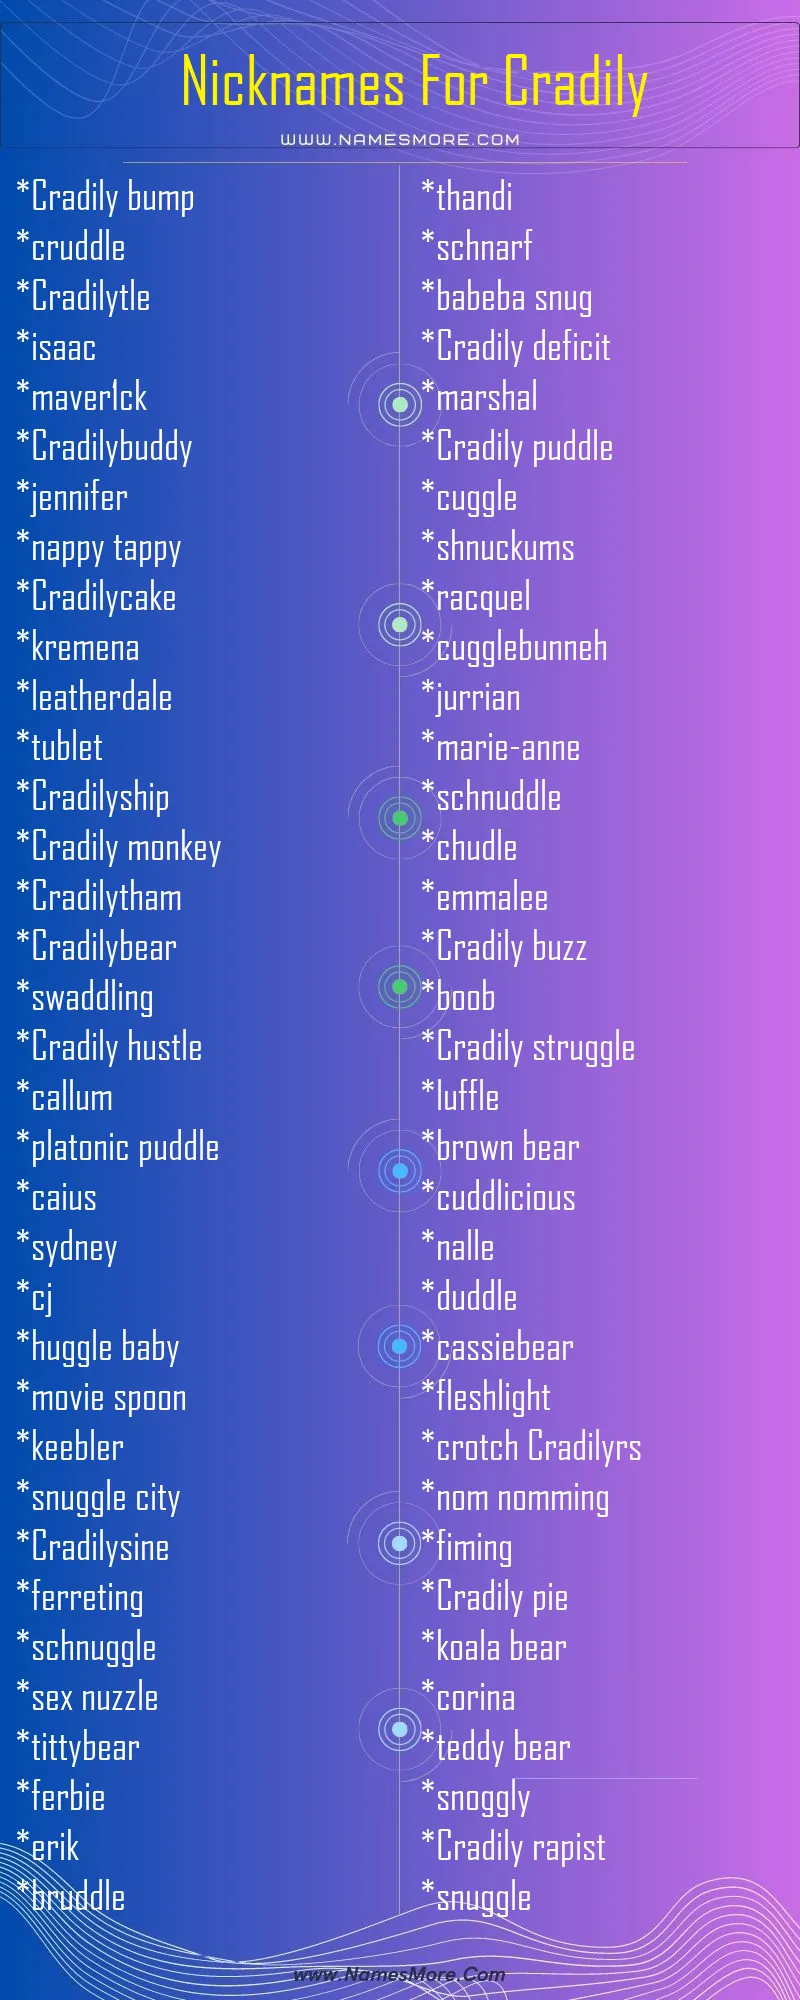 1100+ Nicknames For Cradily (Cool & Creative) List Infographic